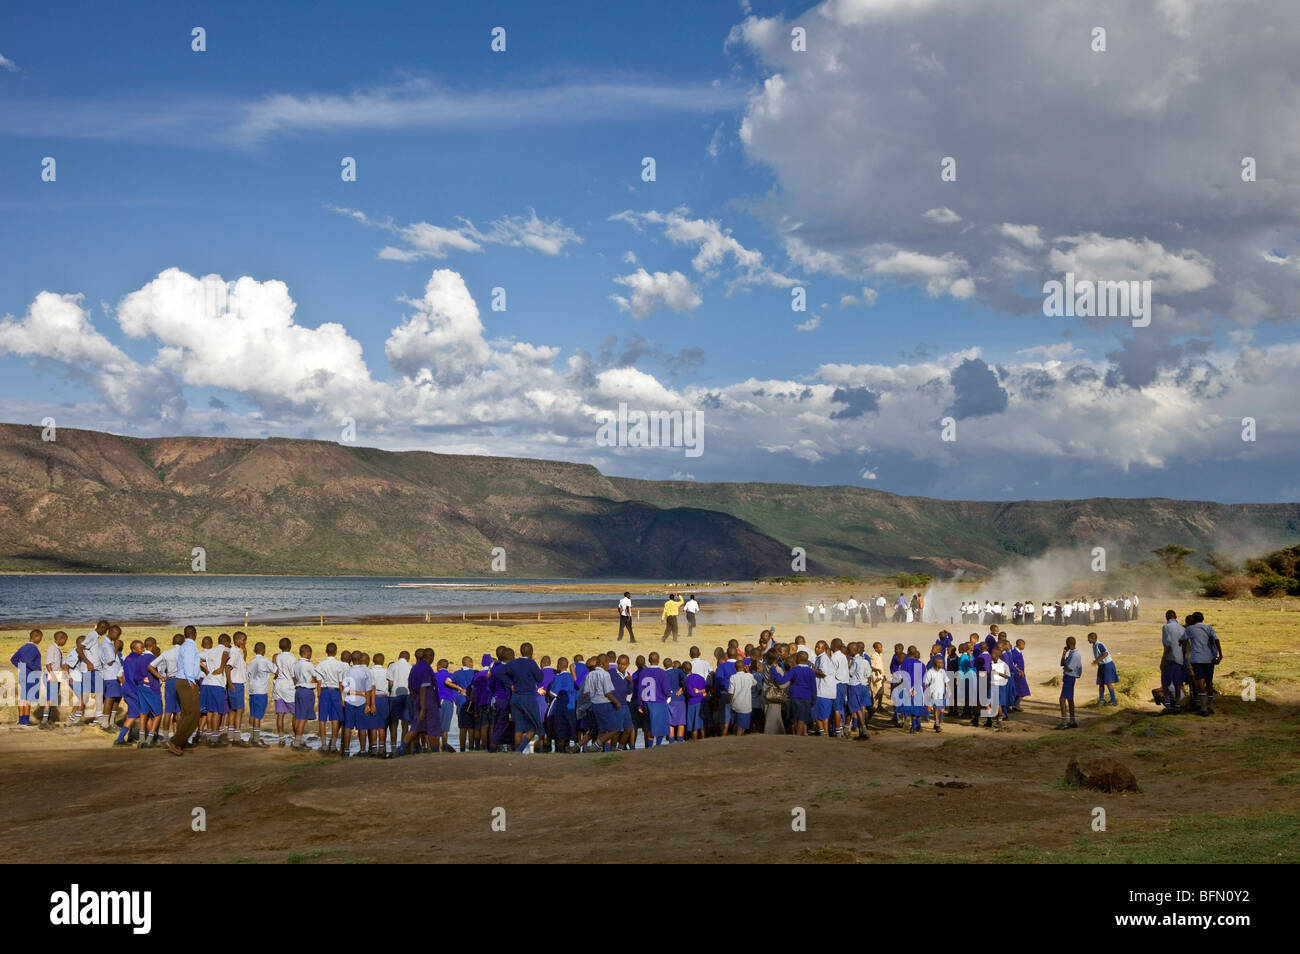 Kenya, Bogoria. School children on an official school outing visit the geysers and hot springs beside Lake Bogoria. Stock Photo